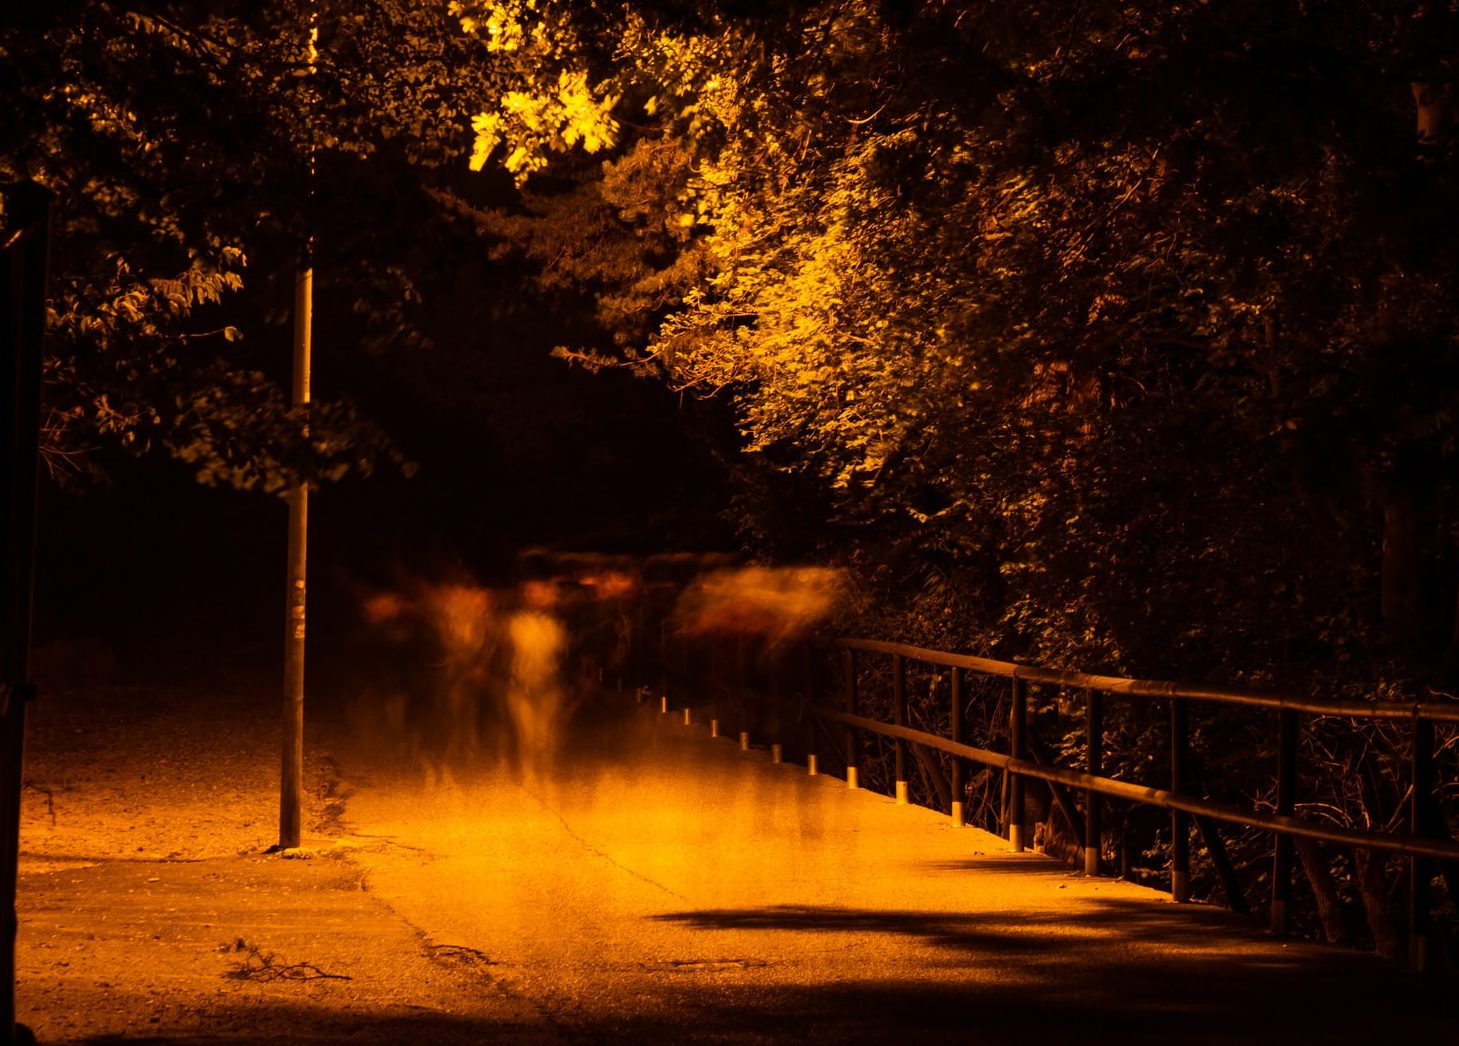 An image a night with translucent ghosts floating under the streetlight